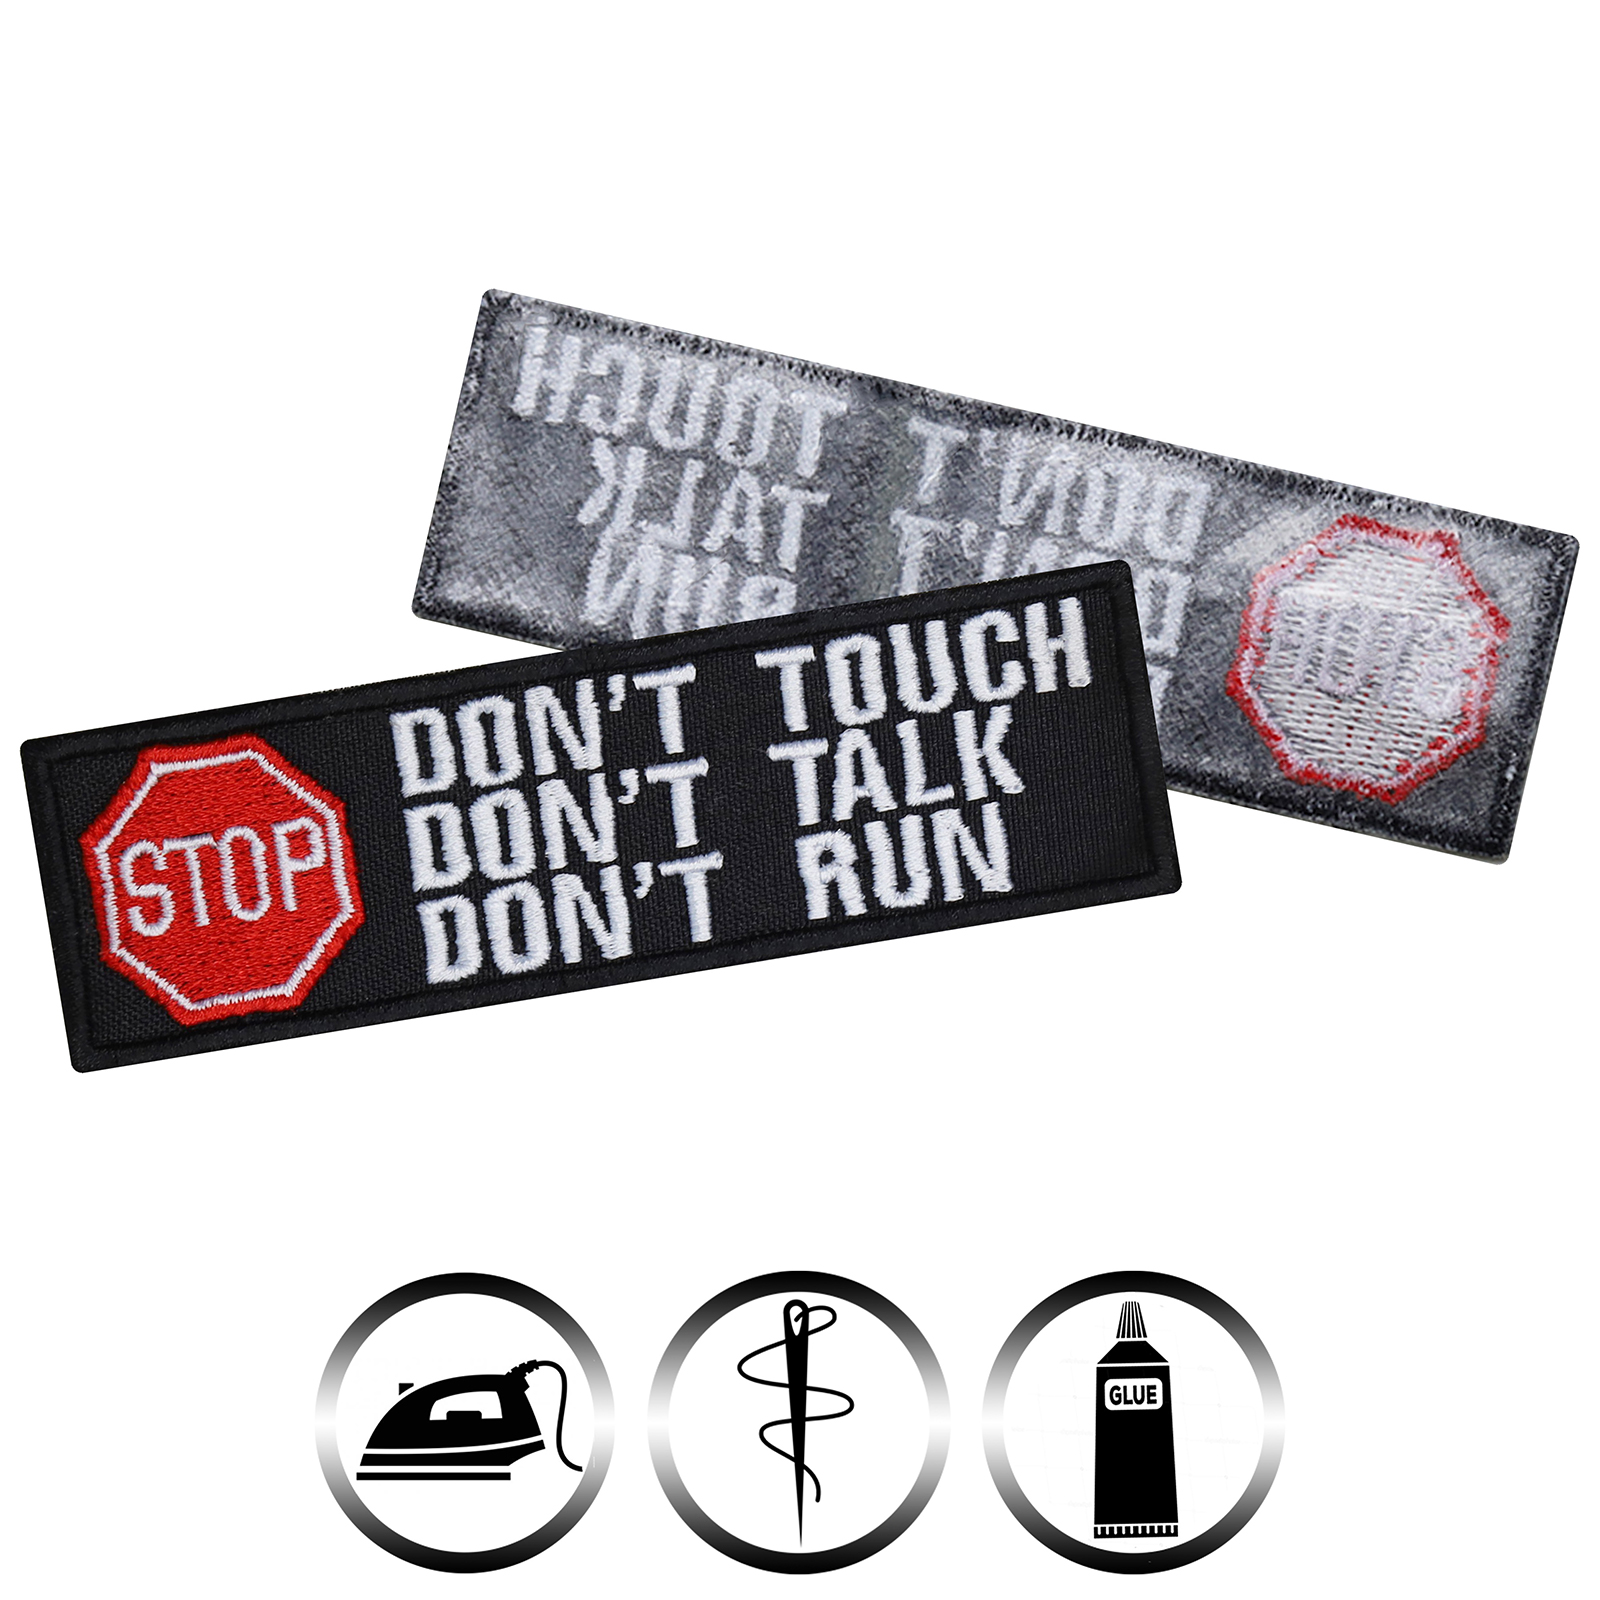 Don't touch - don't talk - don't run - Patch